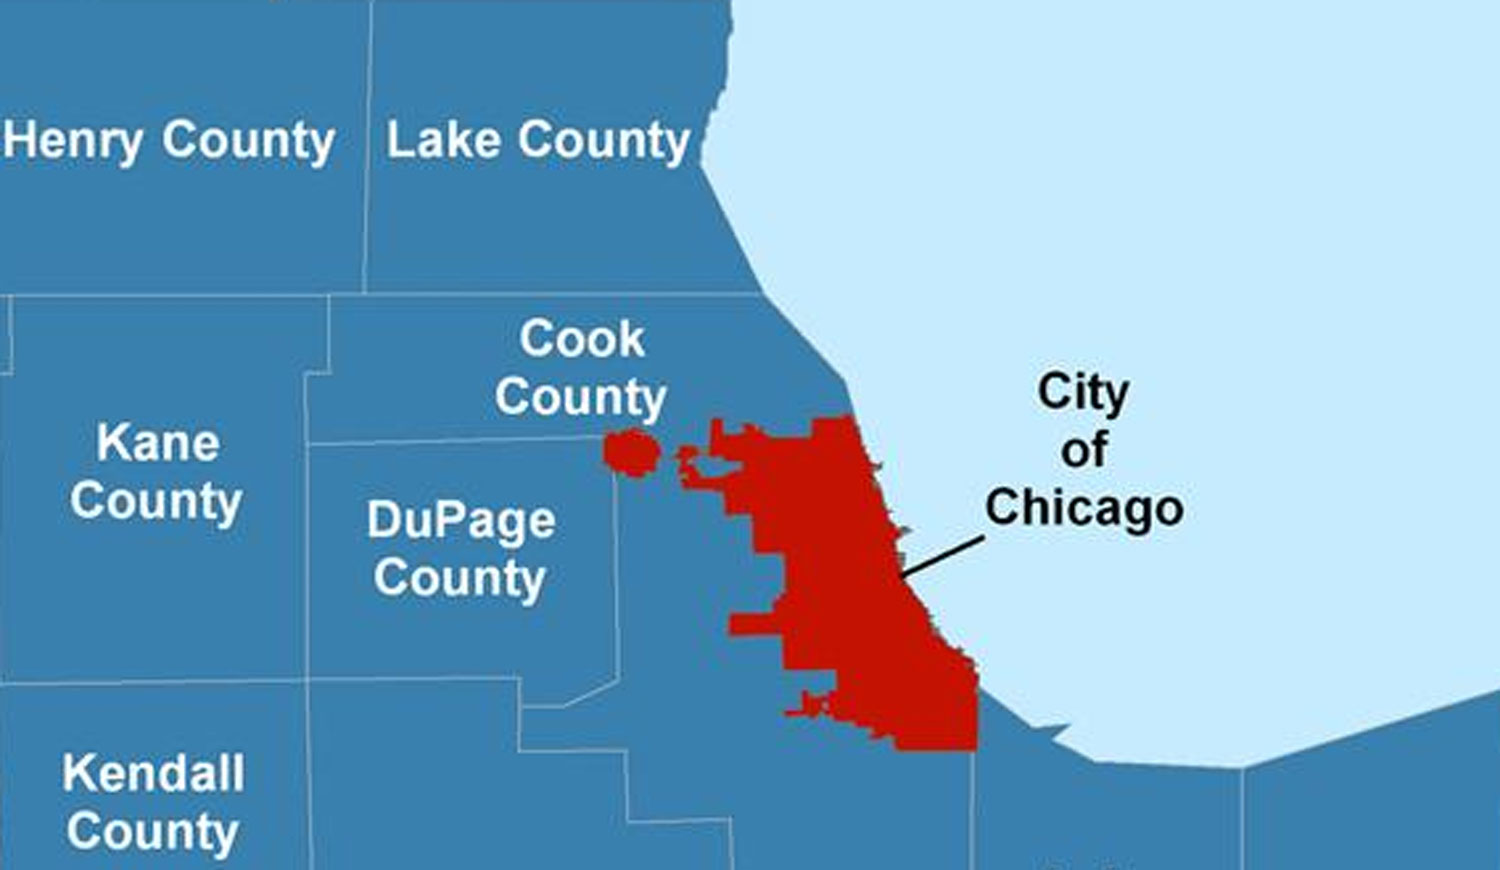 A map look of the city of chicago marked in red color